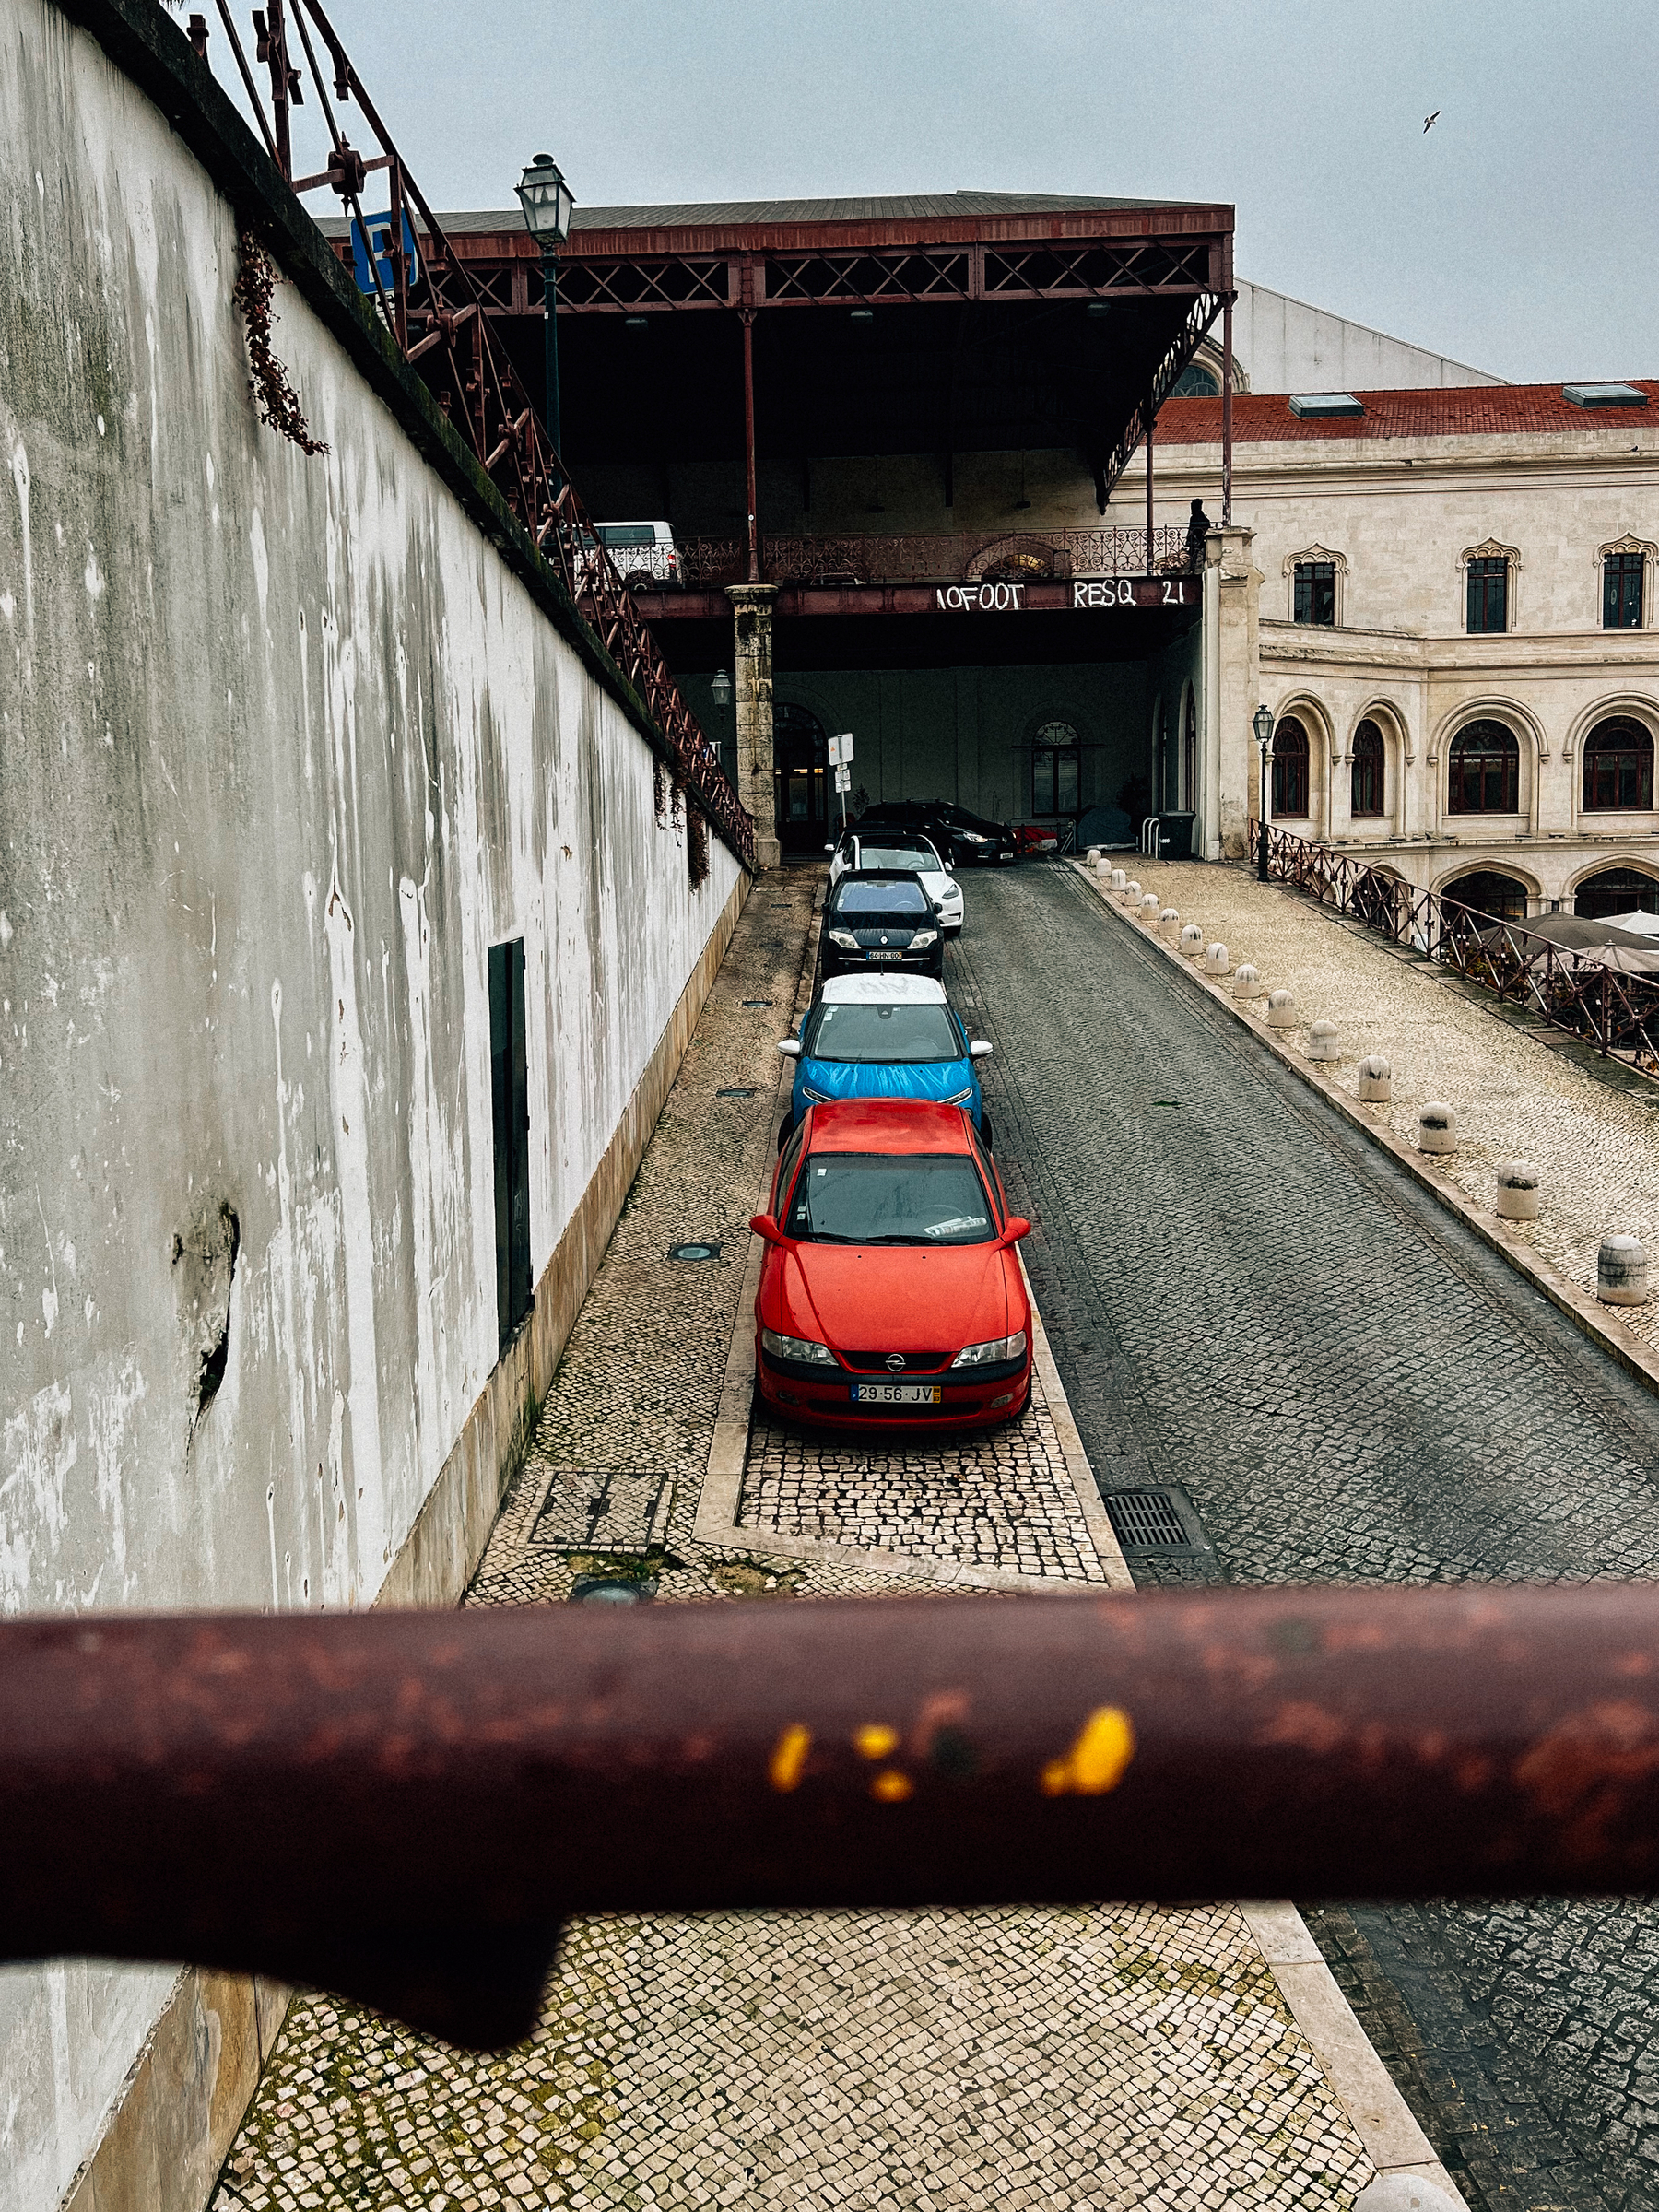 A narrow alley with a line of parked cars, framed by a weathered wall on the left and an industrial building with a red iron bridge structure to the right.